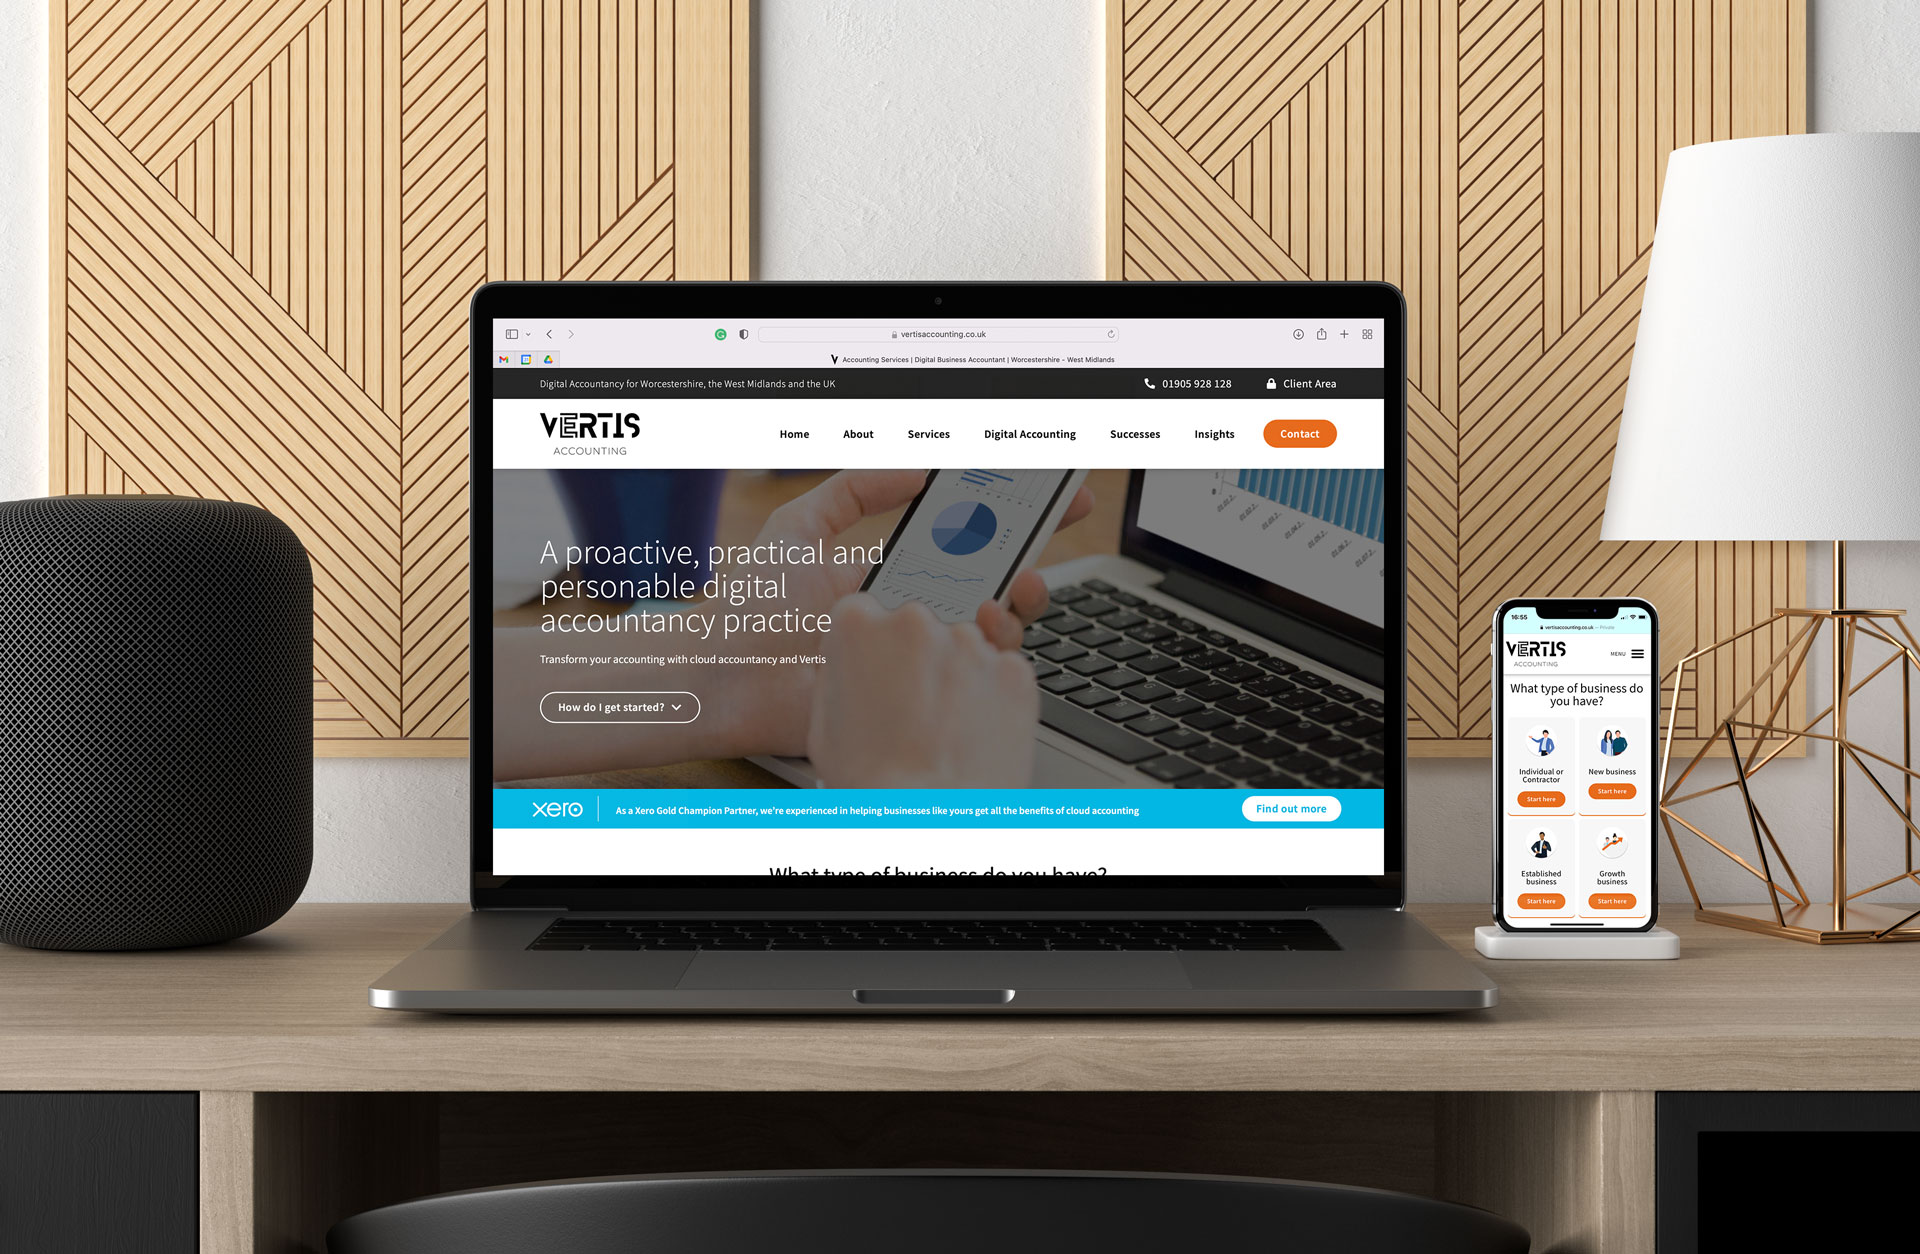 The Vertis Accounting Website - Responsive Web Design for Vertis Accounting from Noble Digital - sown on a laptop and smartphone, alongside a smart speaker